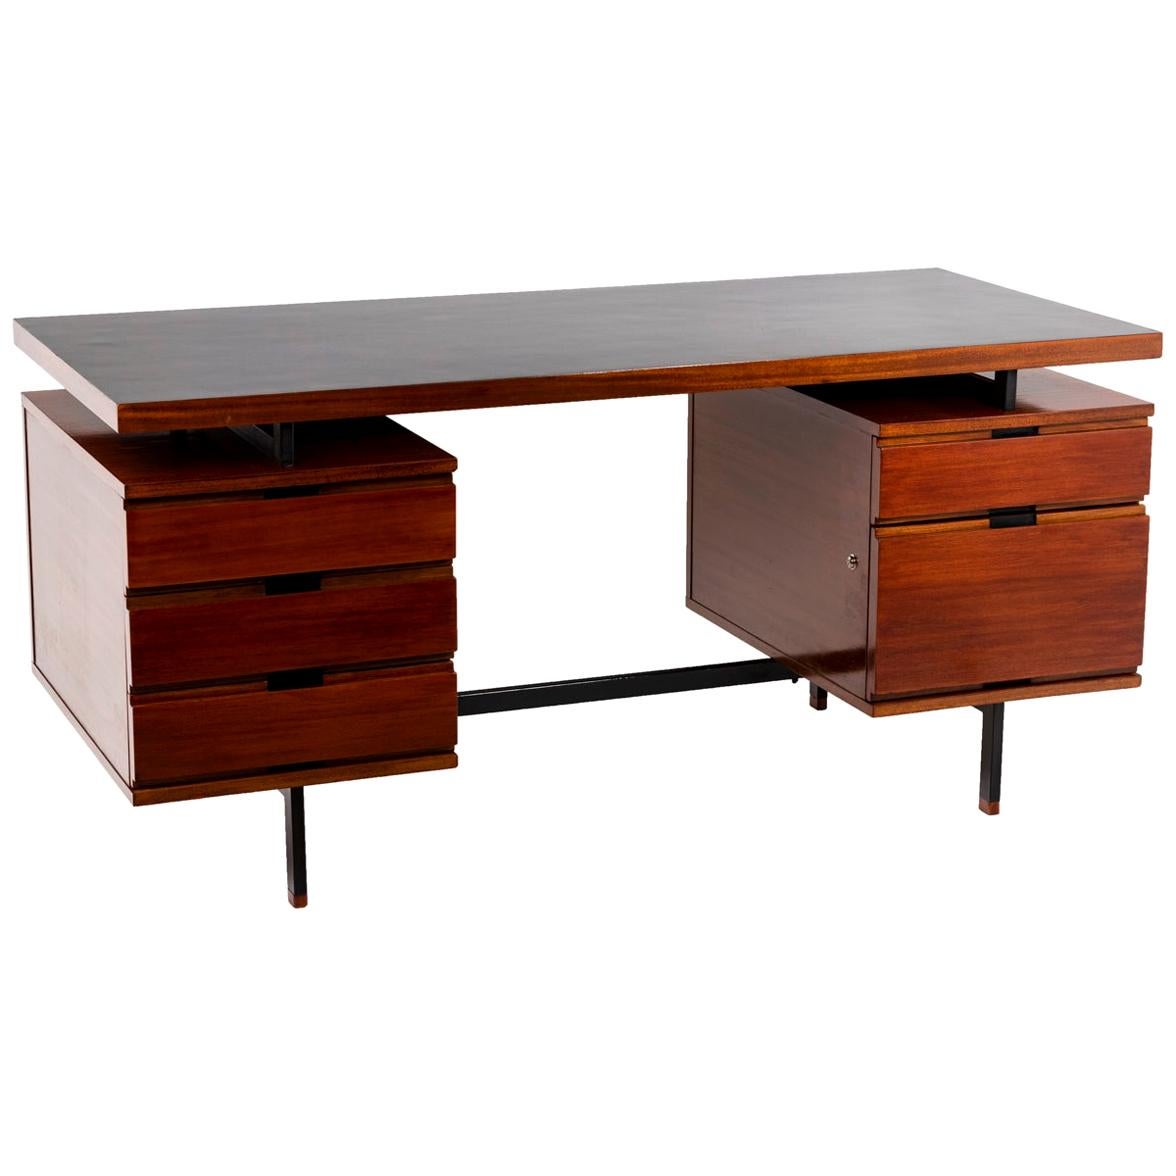 Pierre Guariche, Desk in Mahogany and Lacquered Metal, 1960's